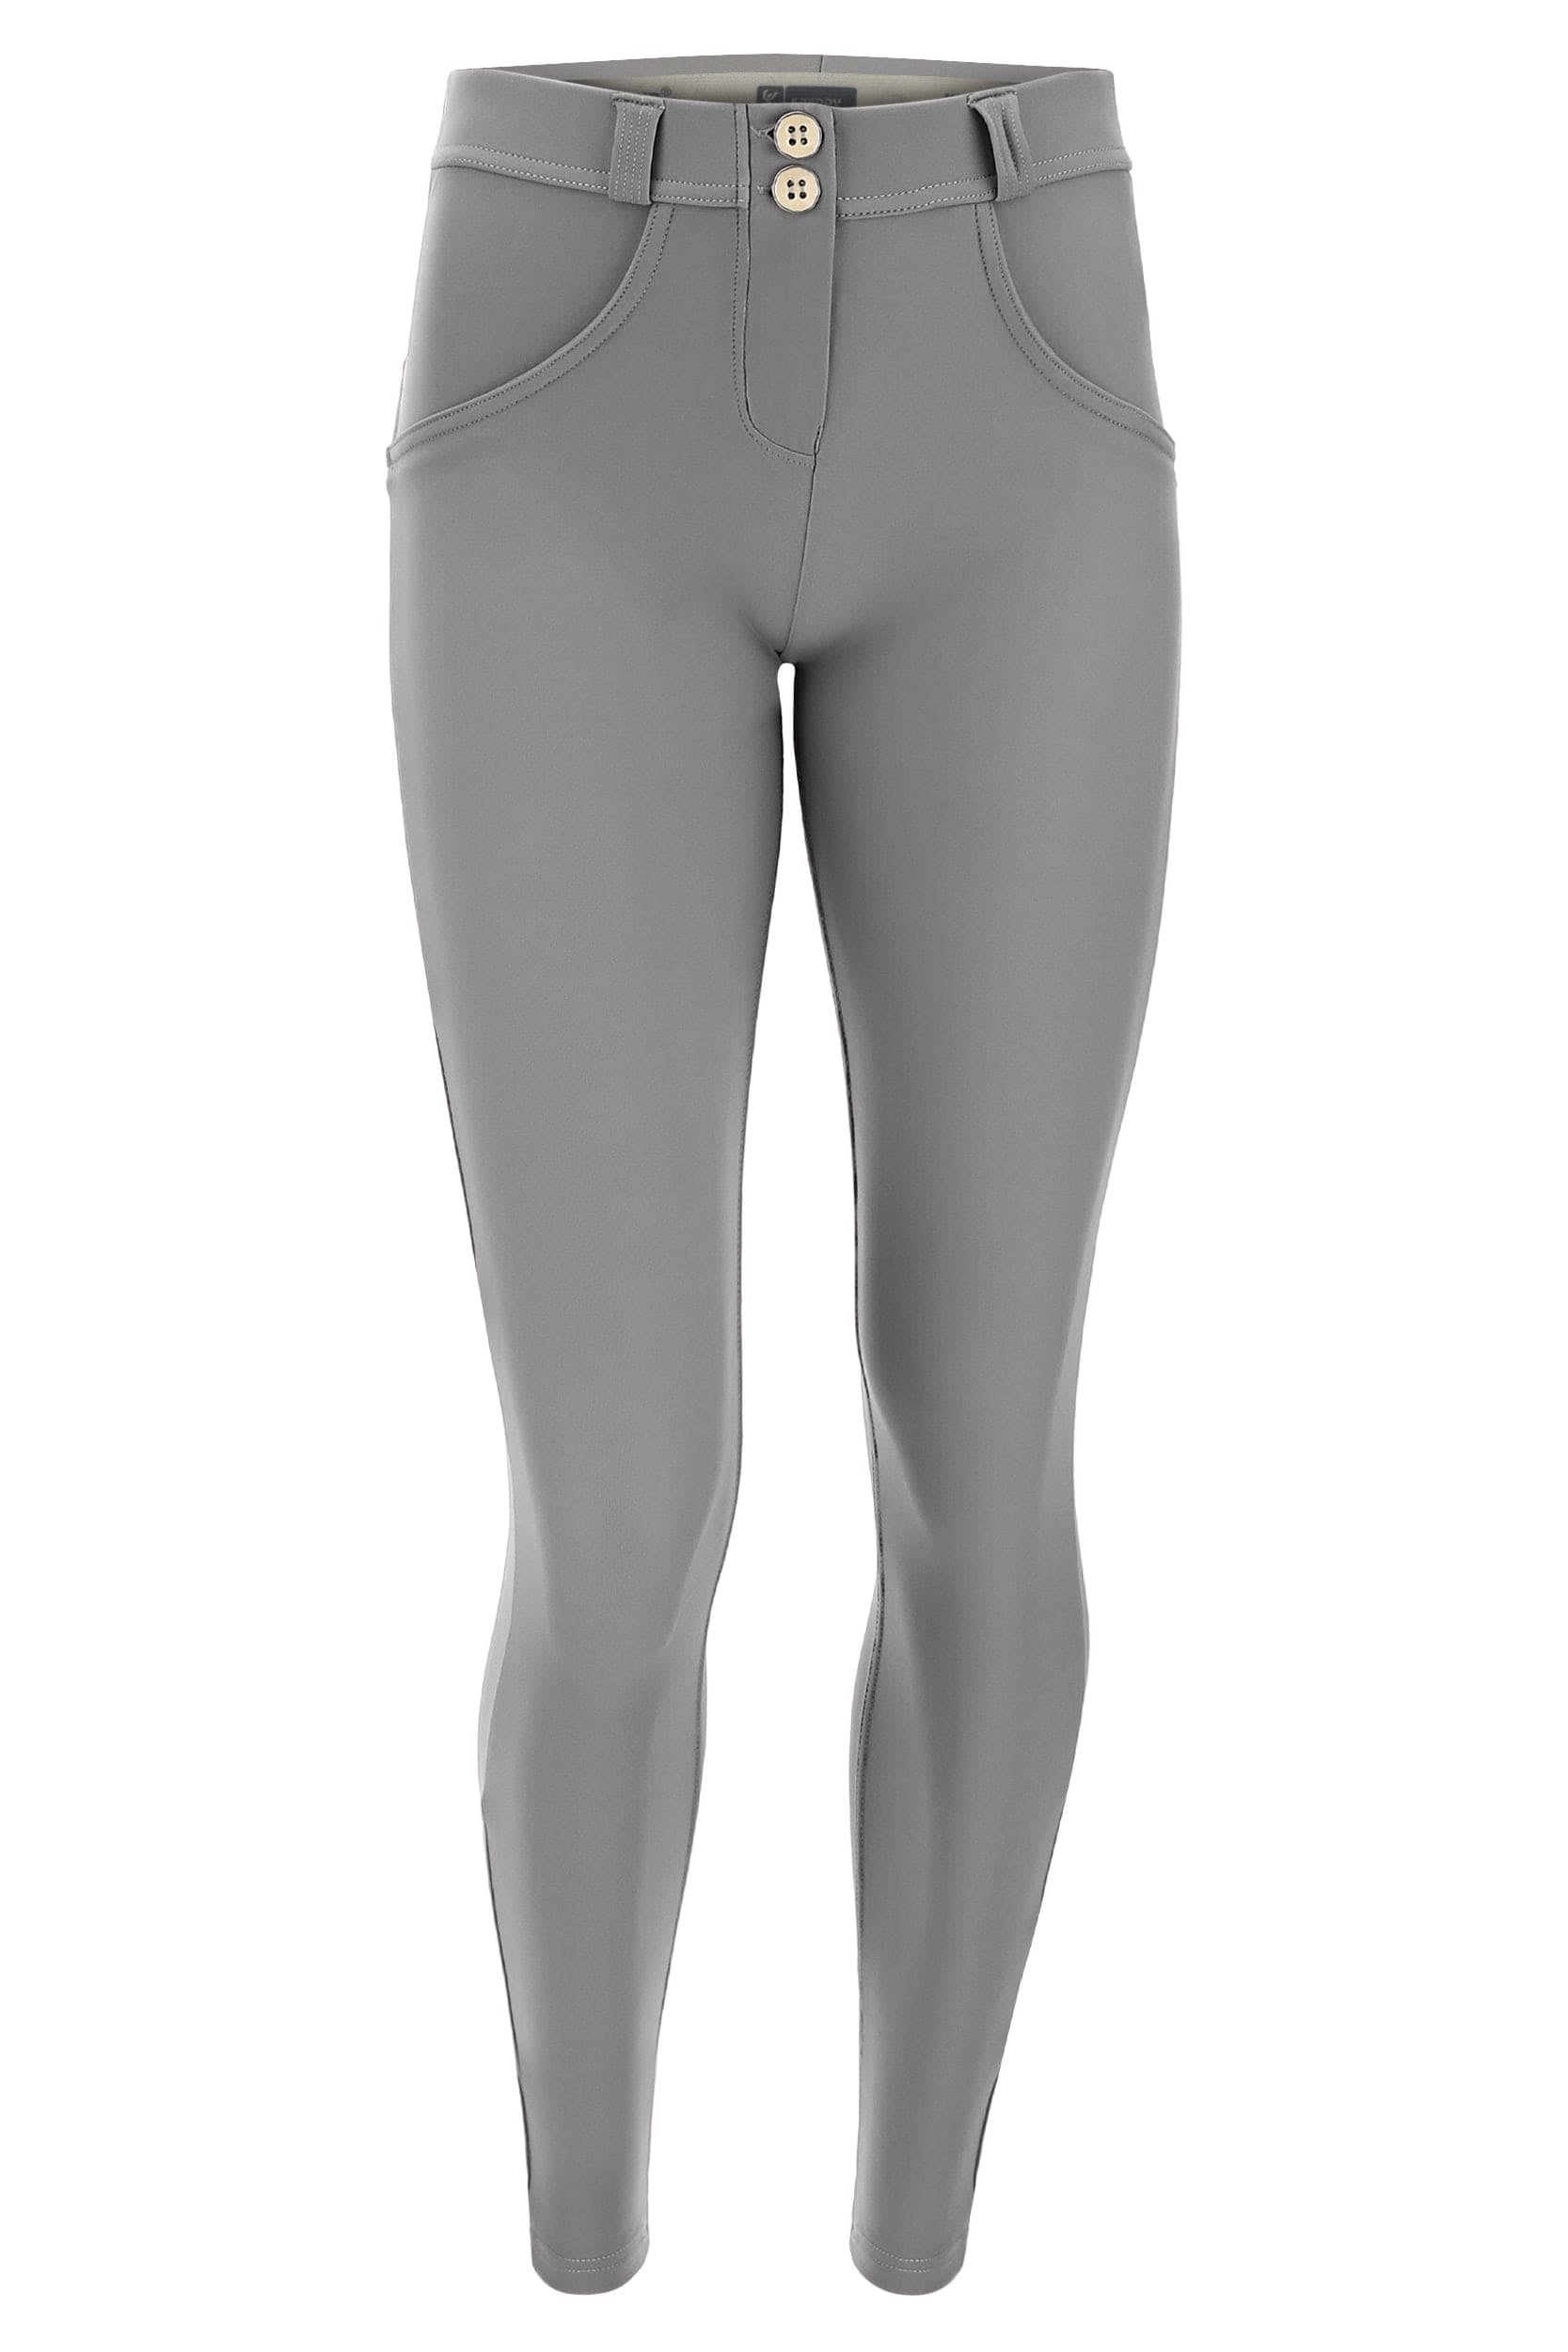 WR.UP® Cupro Trousers - Mid Rise - Full Length - Gray 2